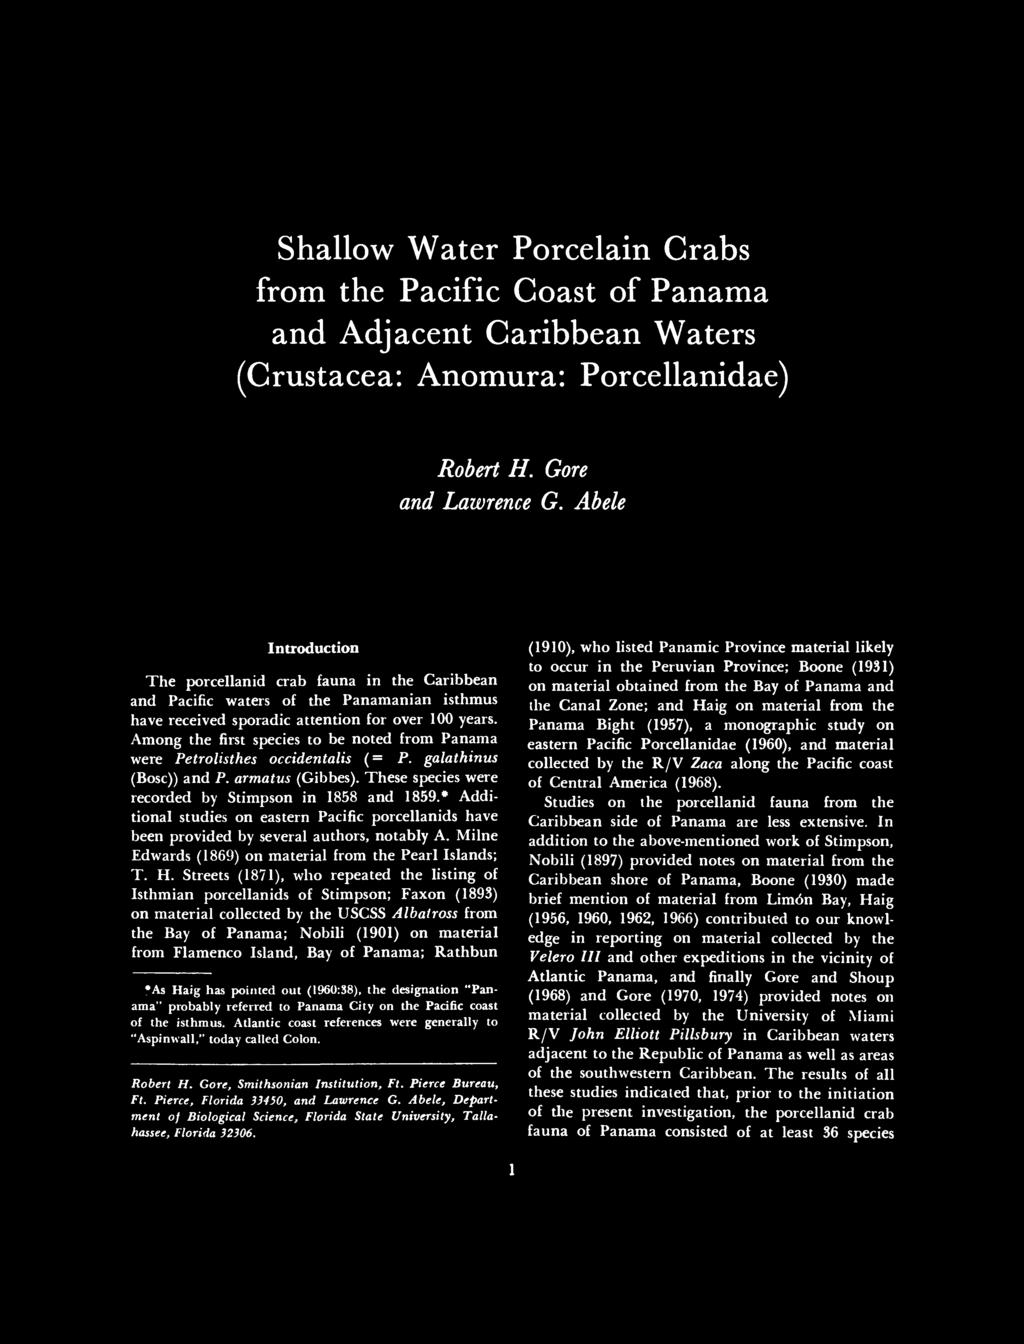 Shallow Water Porcelain Grabs from the Pacific Coast of Panama and Adjacent Caribbean Waters (Crustacea: Anomura: Porcellanidae) Robert H. Gore and Lawrence G.